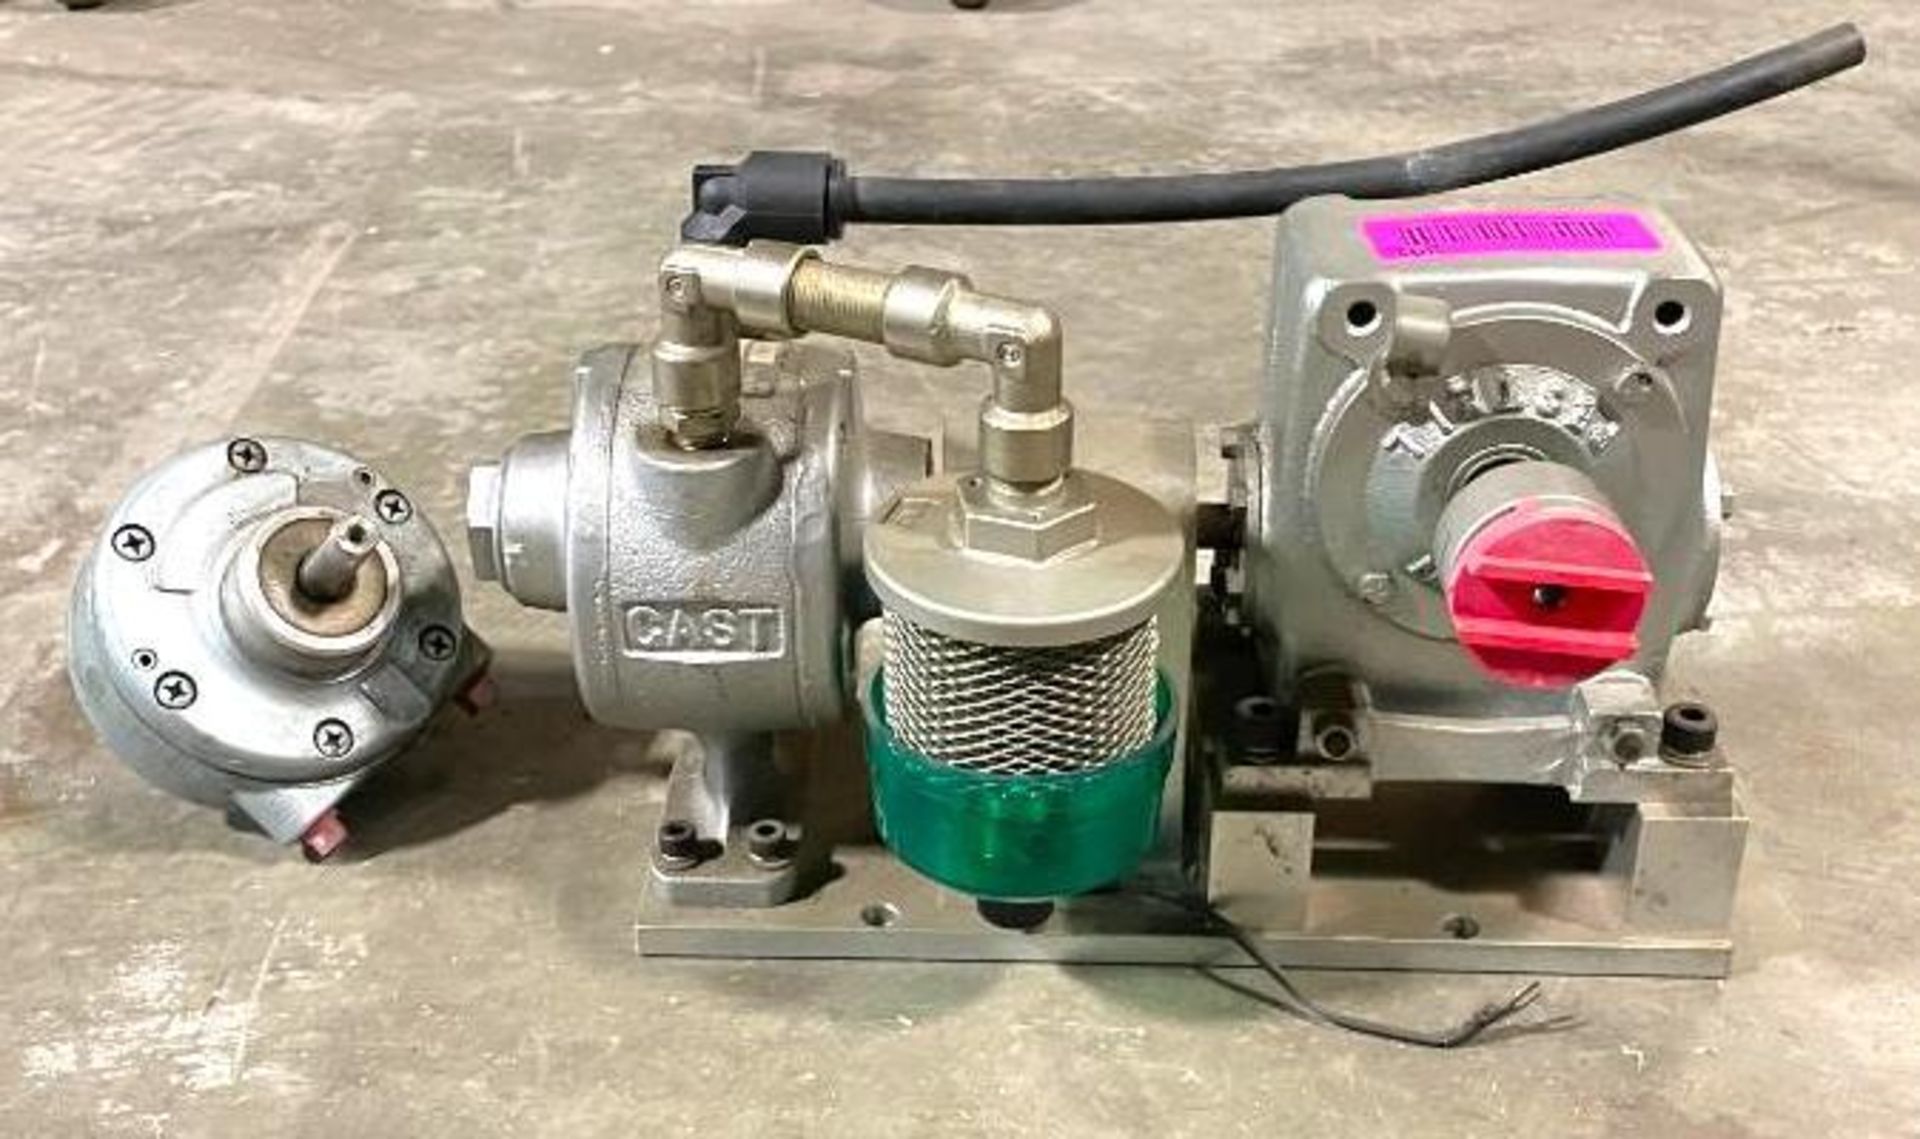 GAST PNEUMATIC AIR MOTOR AND GEARBOX ASSEMBLY UNIT BRAND/MODEL: GAST 4AM-FRV-63A INFORMATION: GAST A